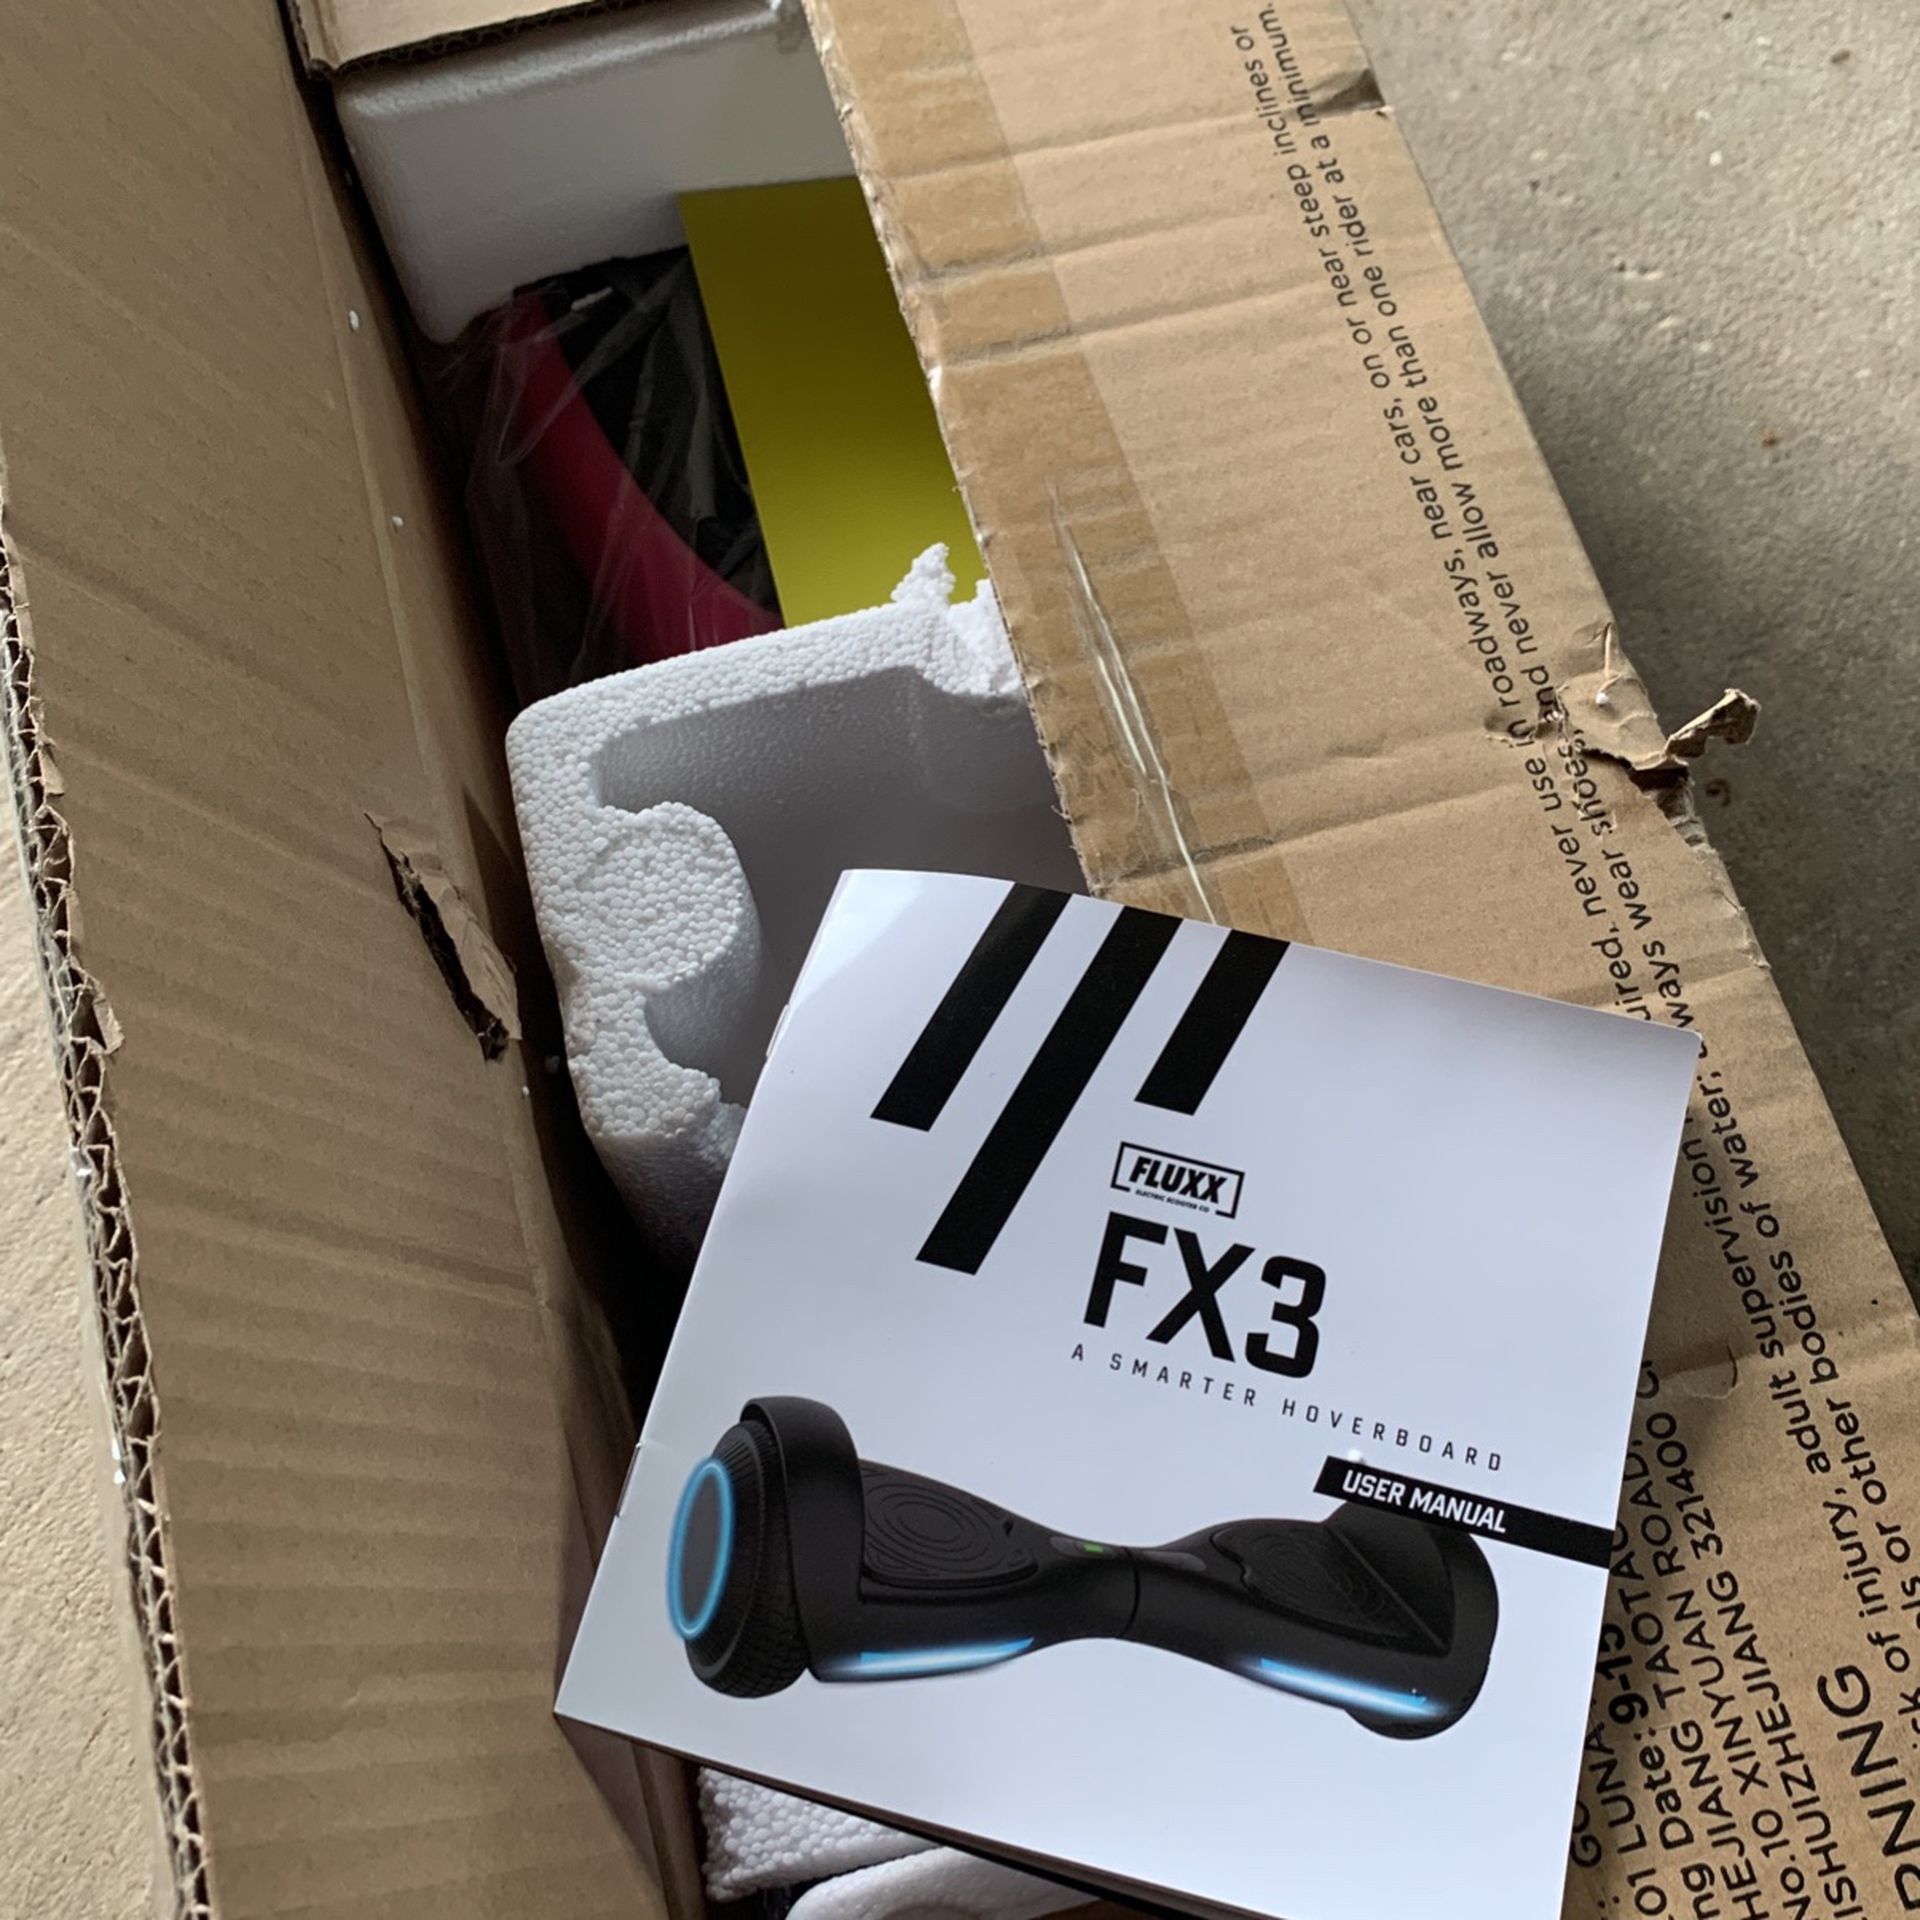 FX3 Hoverboard - Brand New In Box